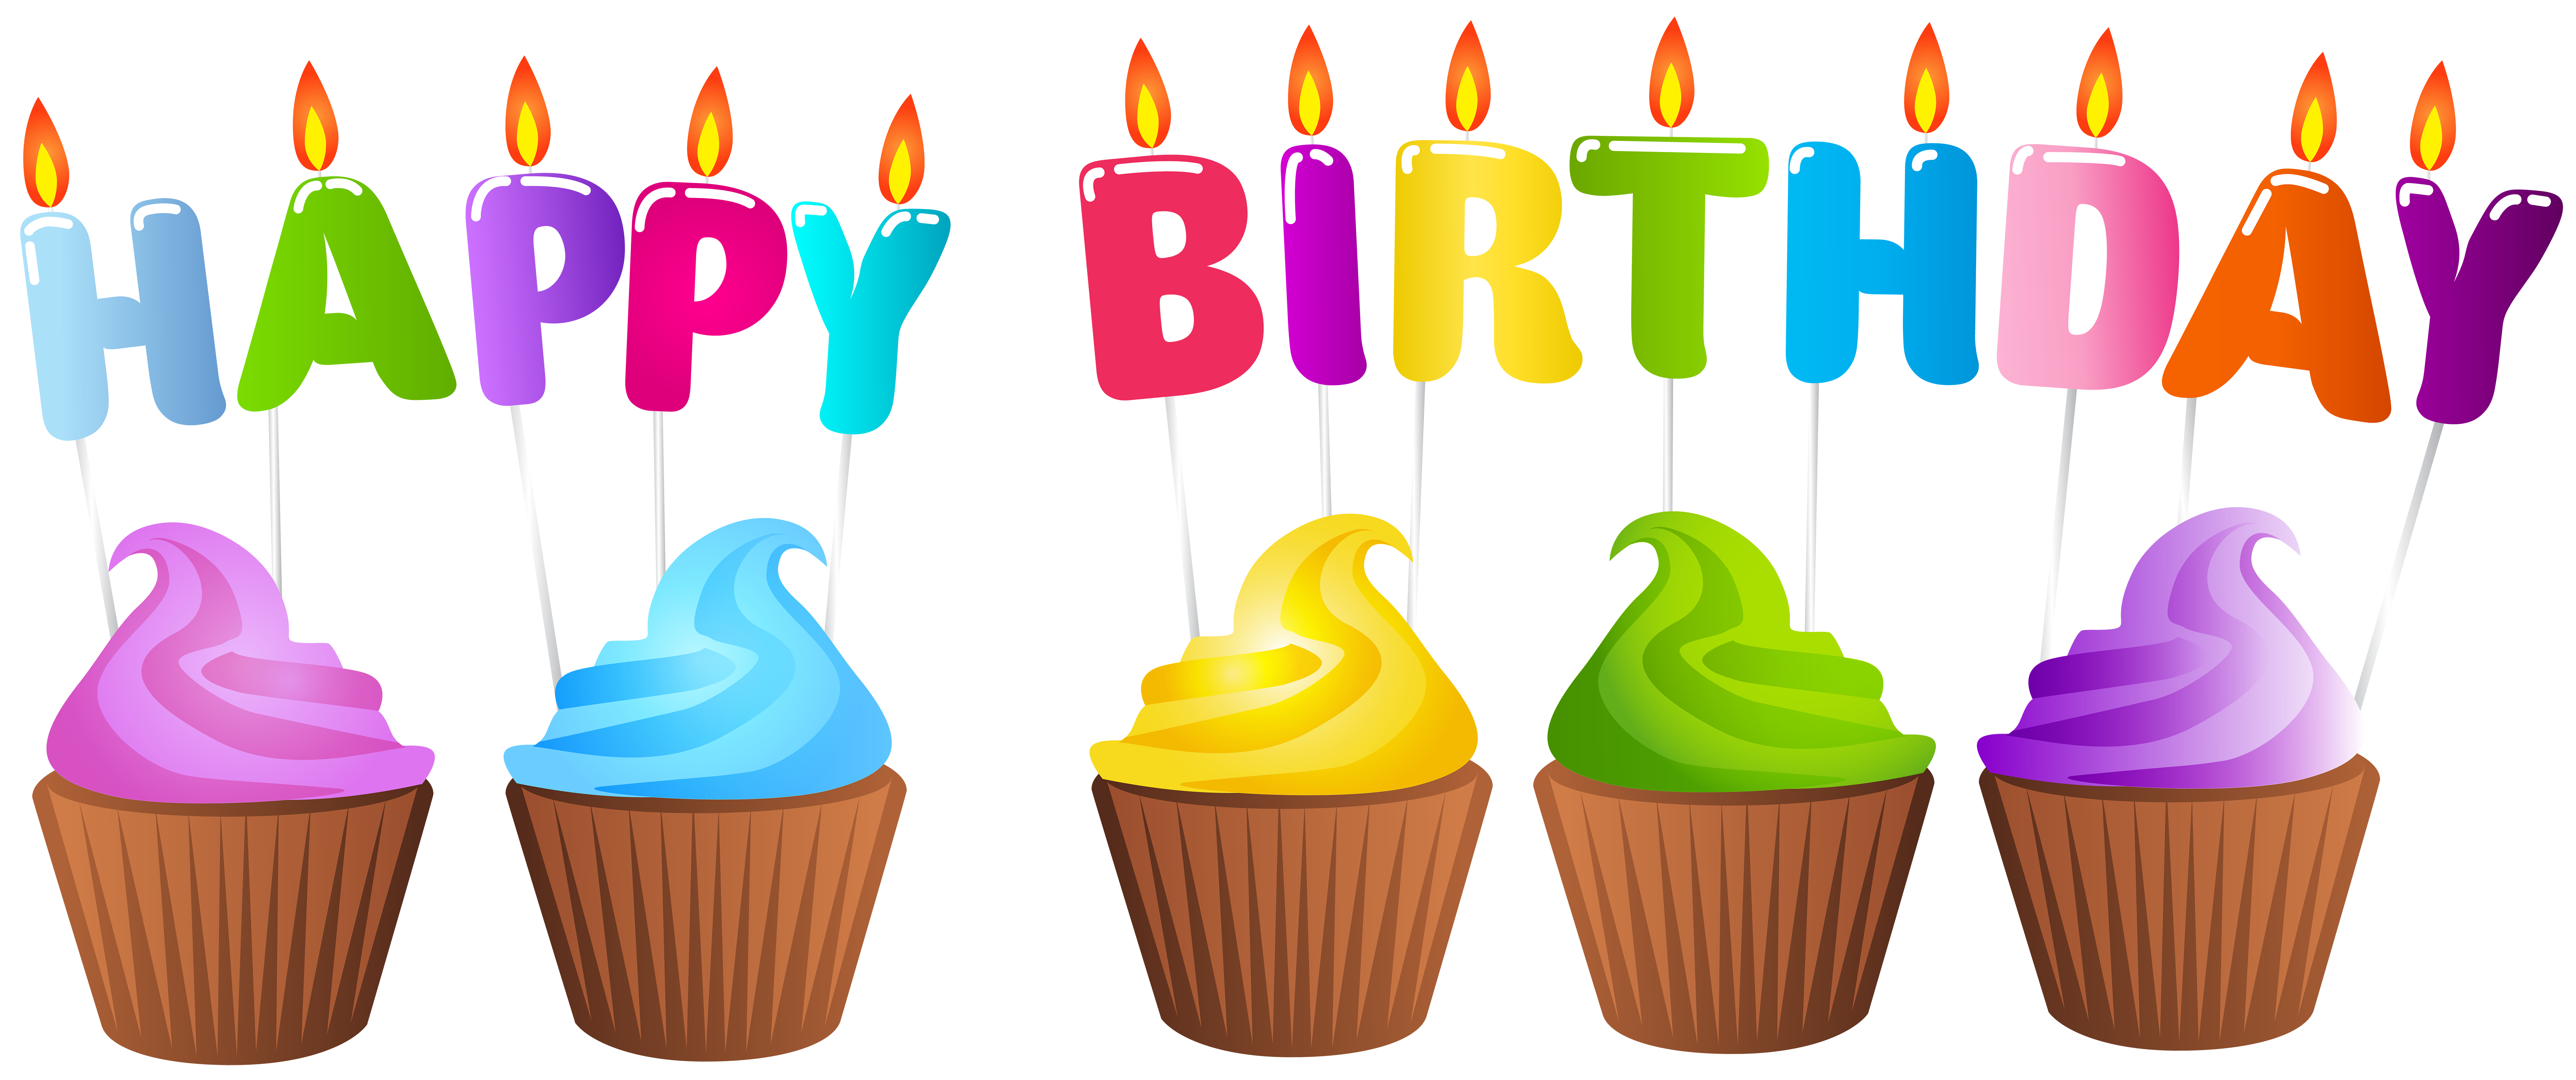 birthday-cake-cupcake-candle-clip-art-birthday-png-download-8000-3355-free-transparent